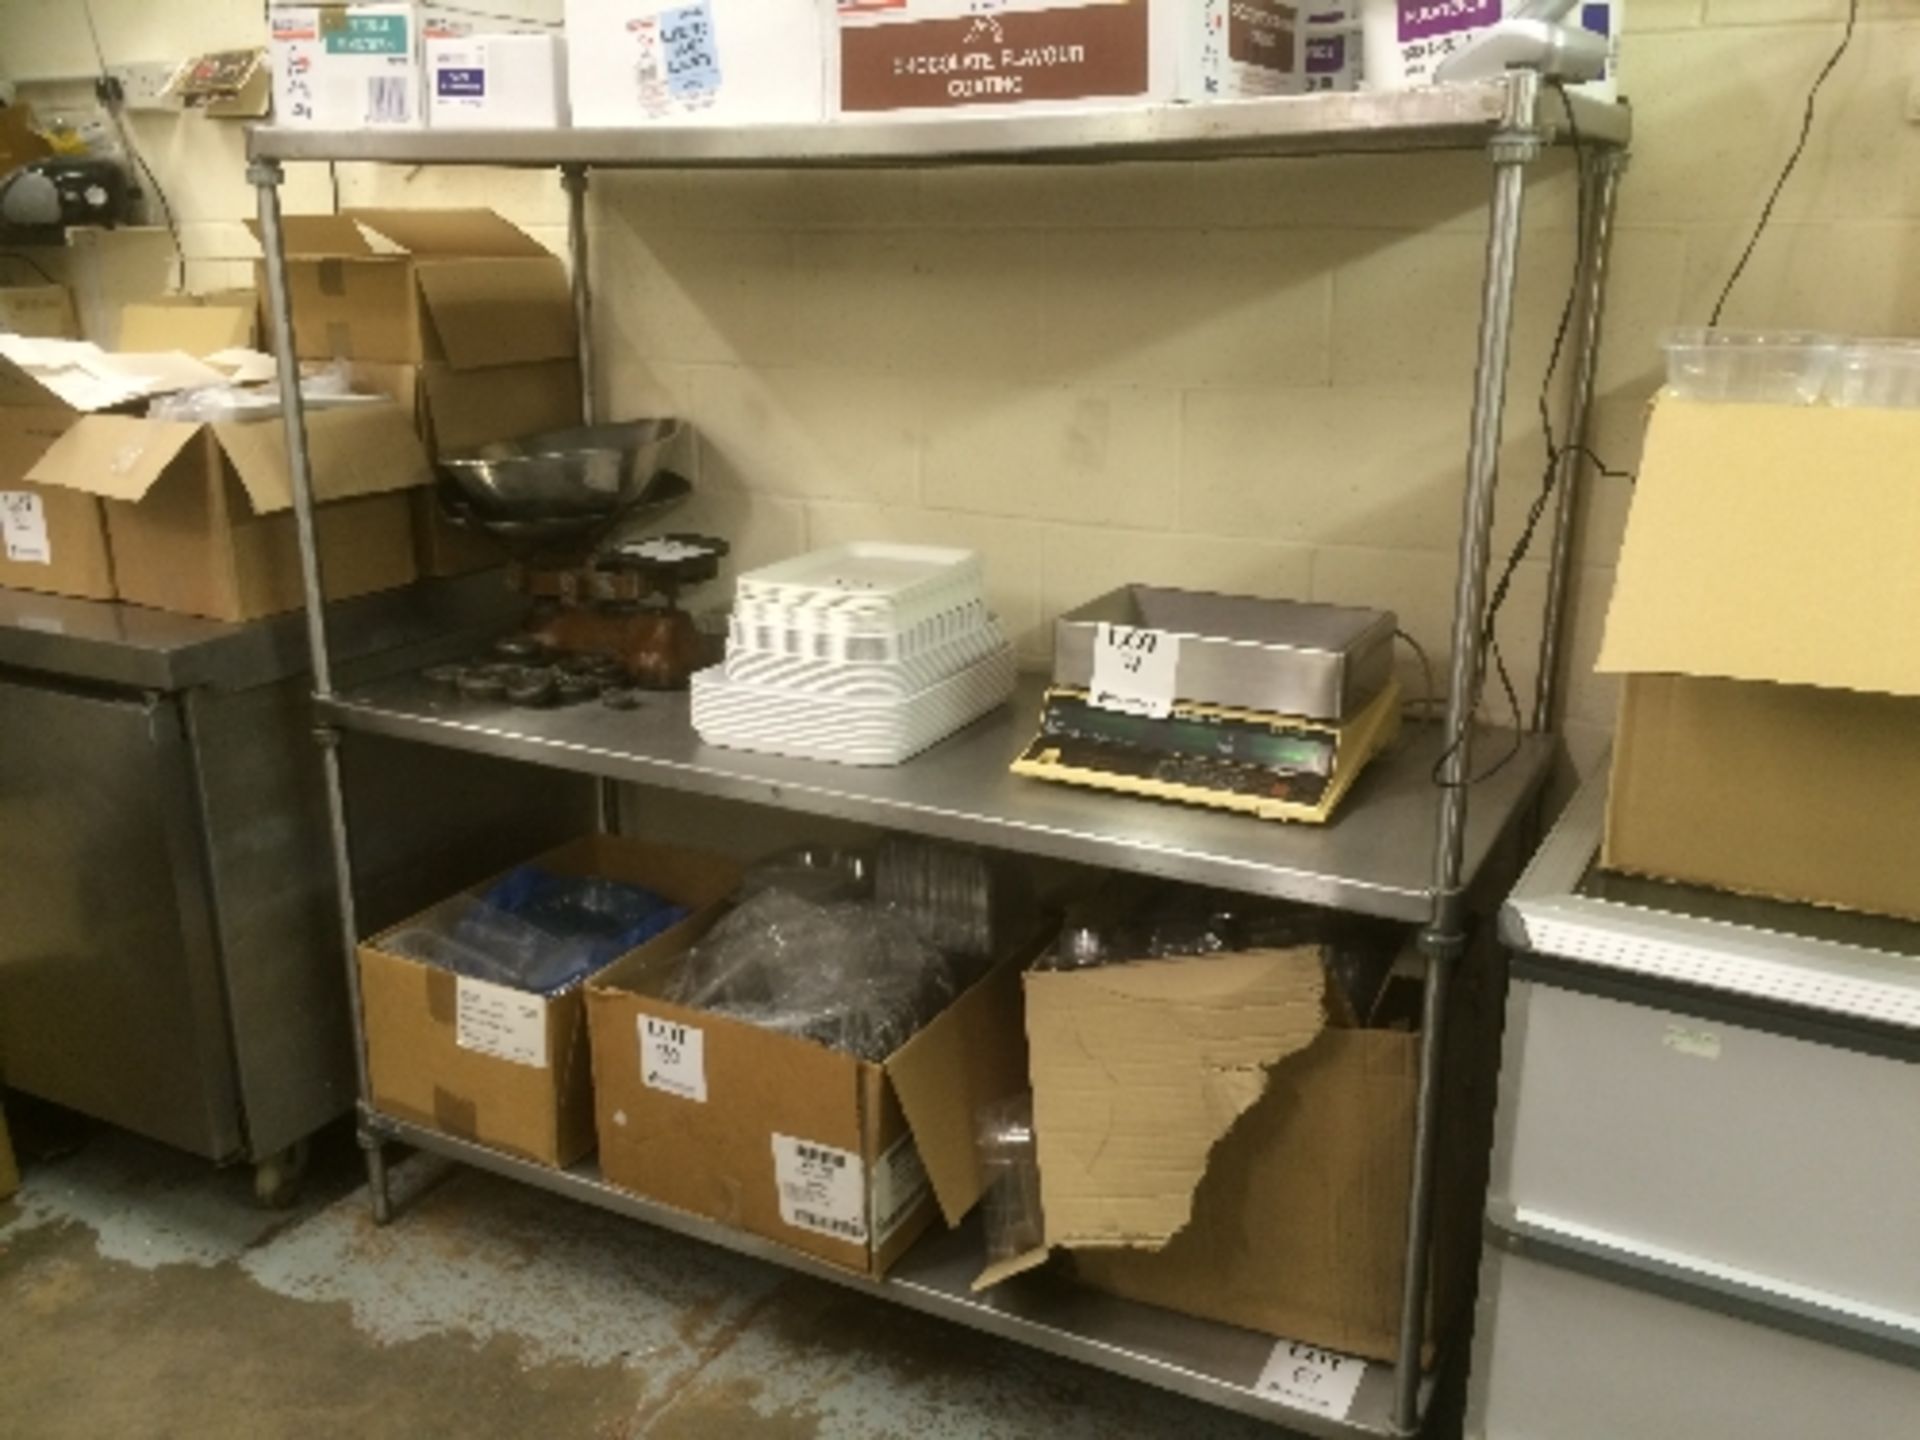 Stainless steel shelving unit (unit only, excluding contents)